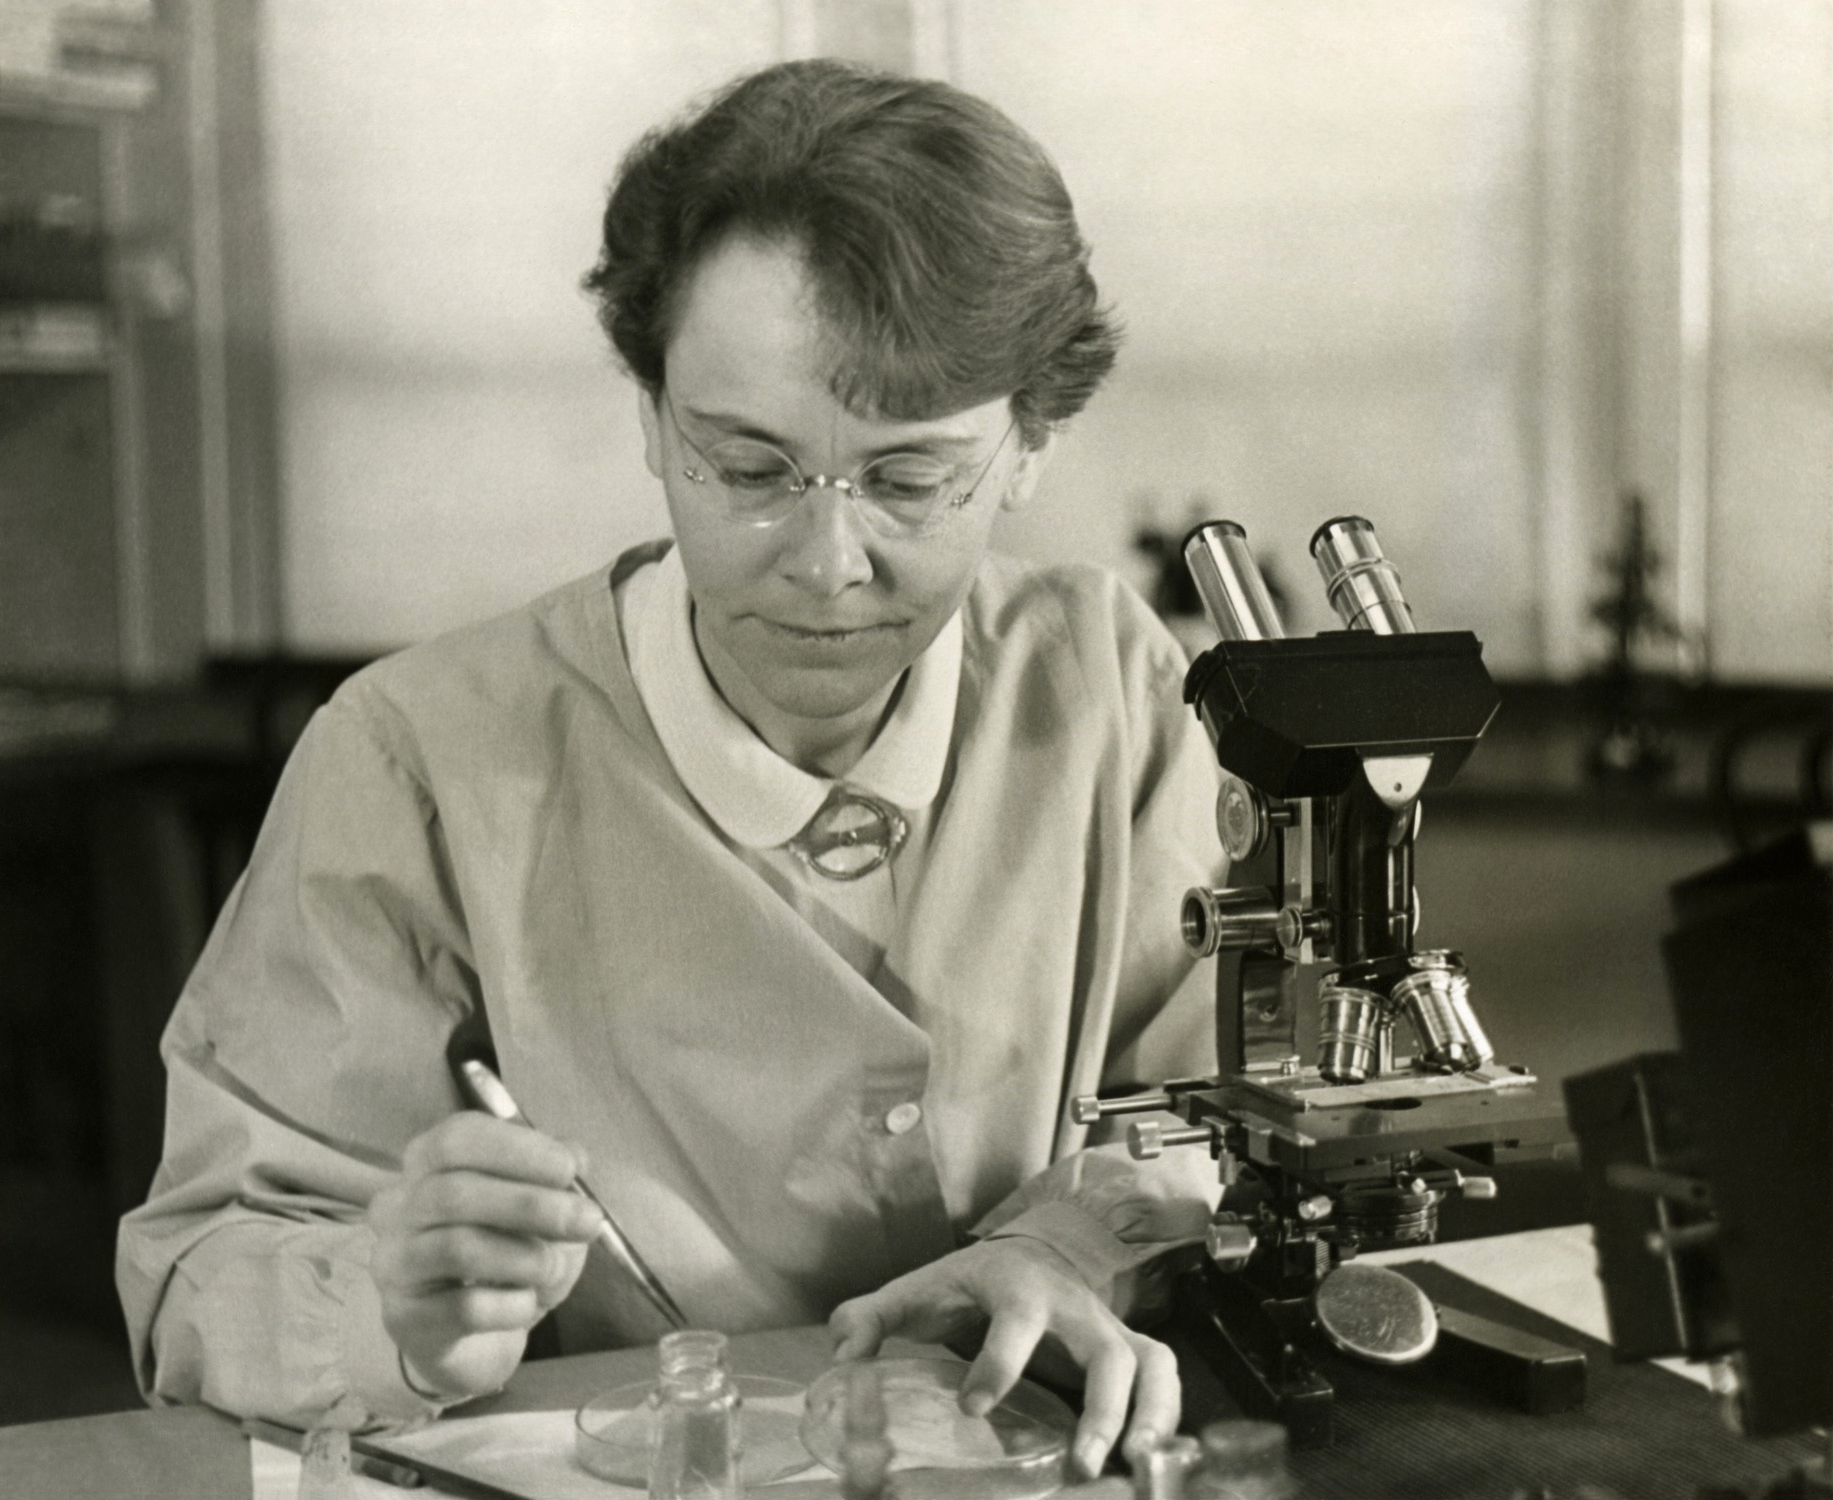 Barbara McClintock (1902-1992), Department of Genetics, Carnegie Institution at Cold Spring Harbor, New York, shown in her laboratory. Source: The Smithsonian